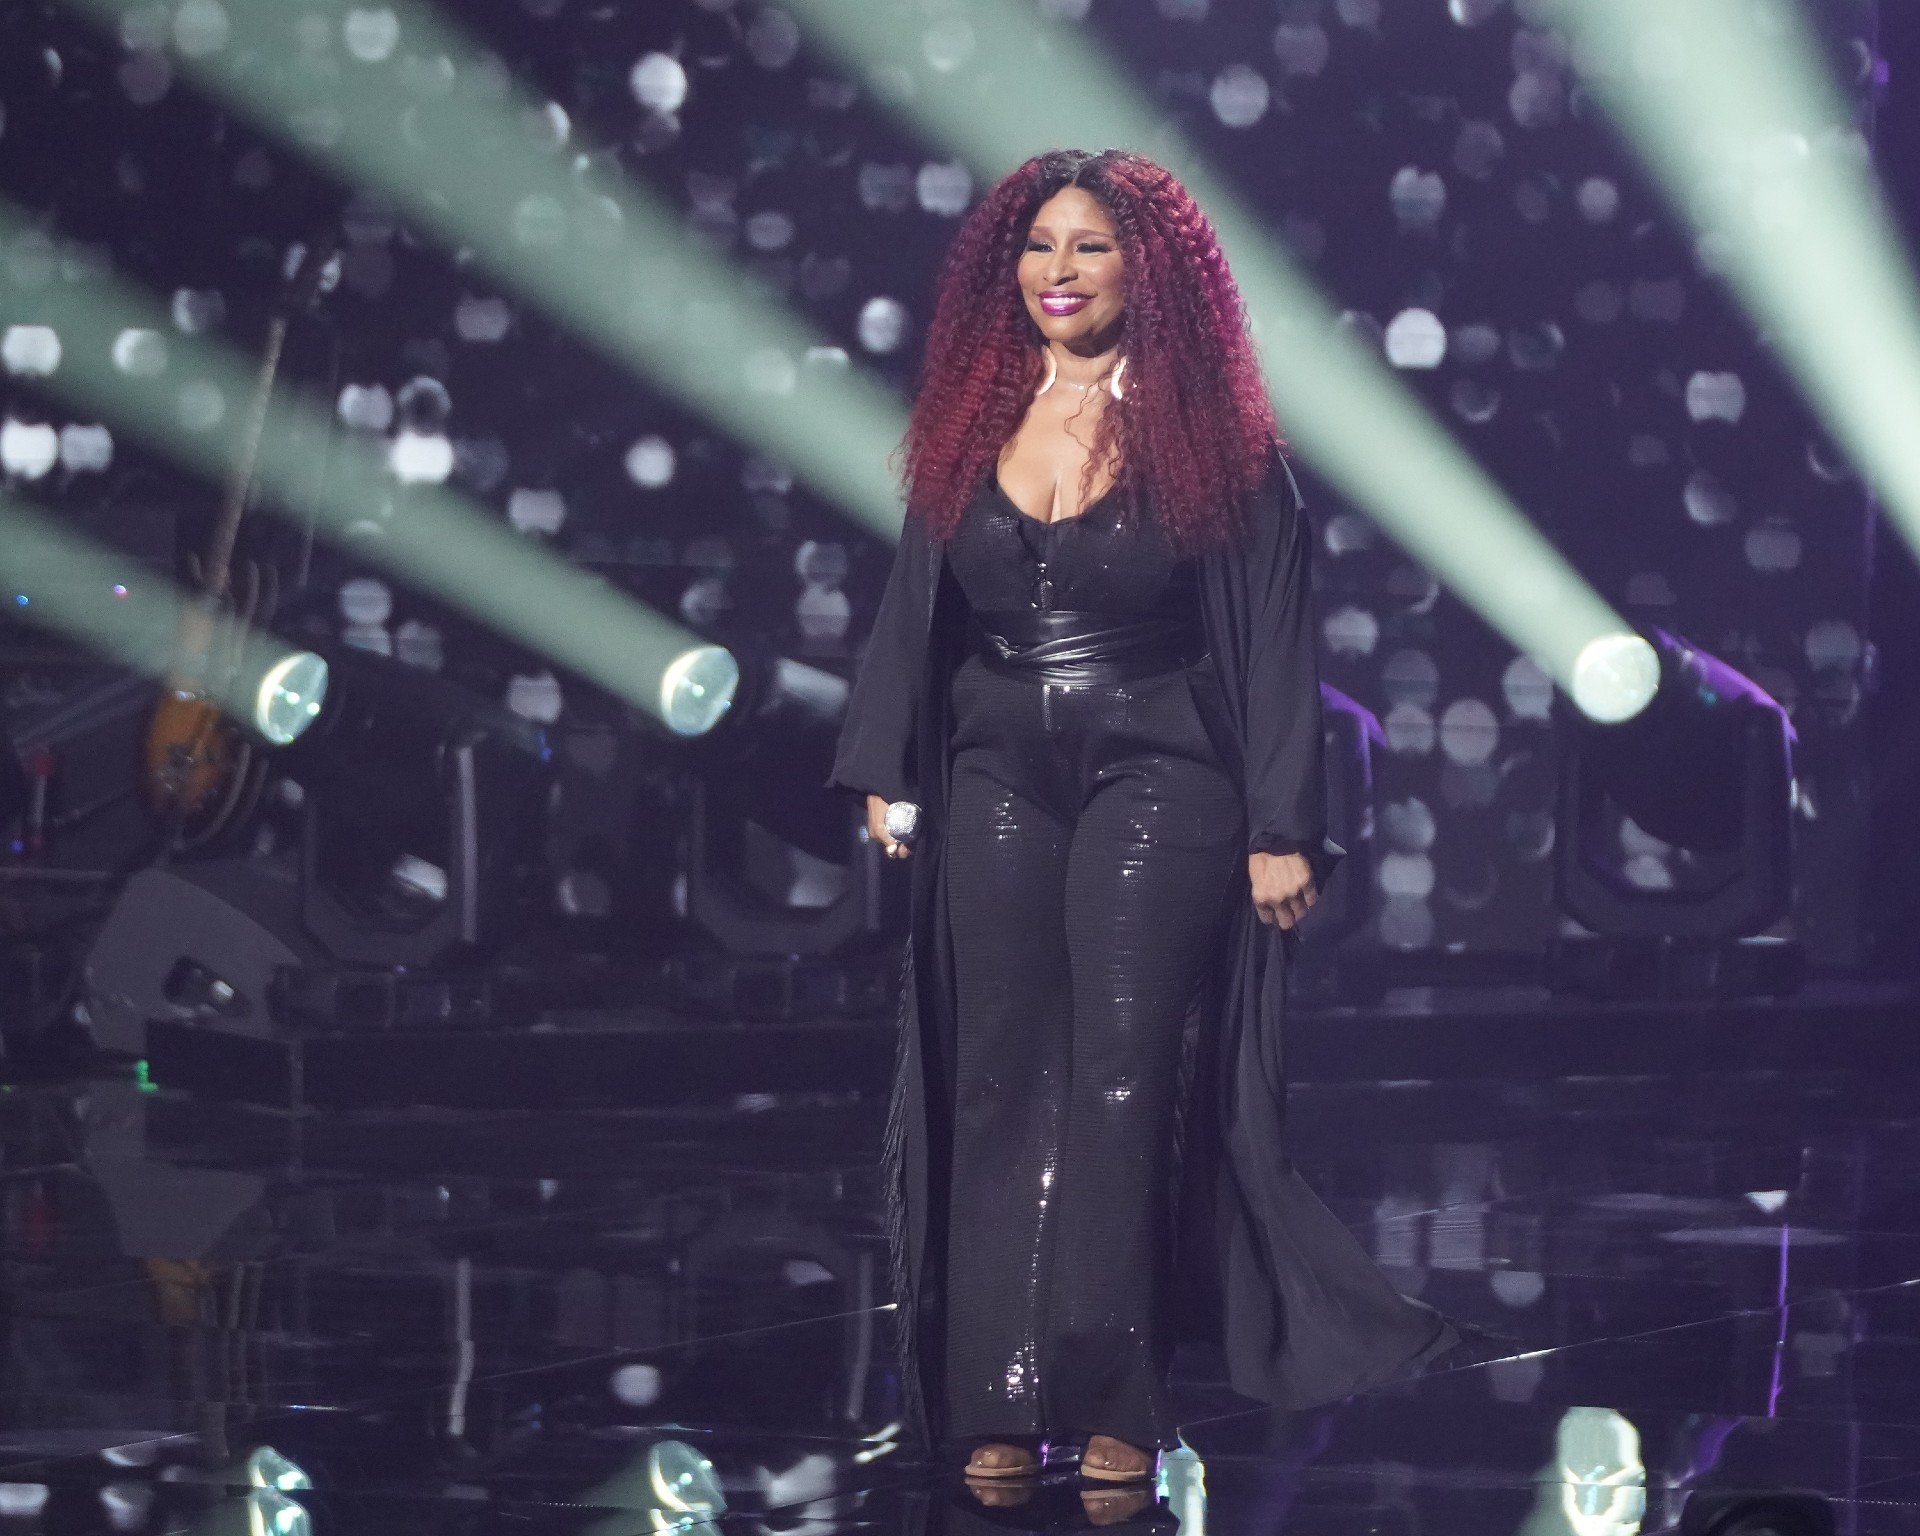 Chaka Kahn dressed in all black during a performance